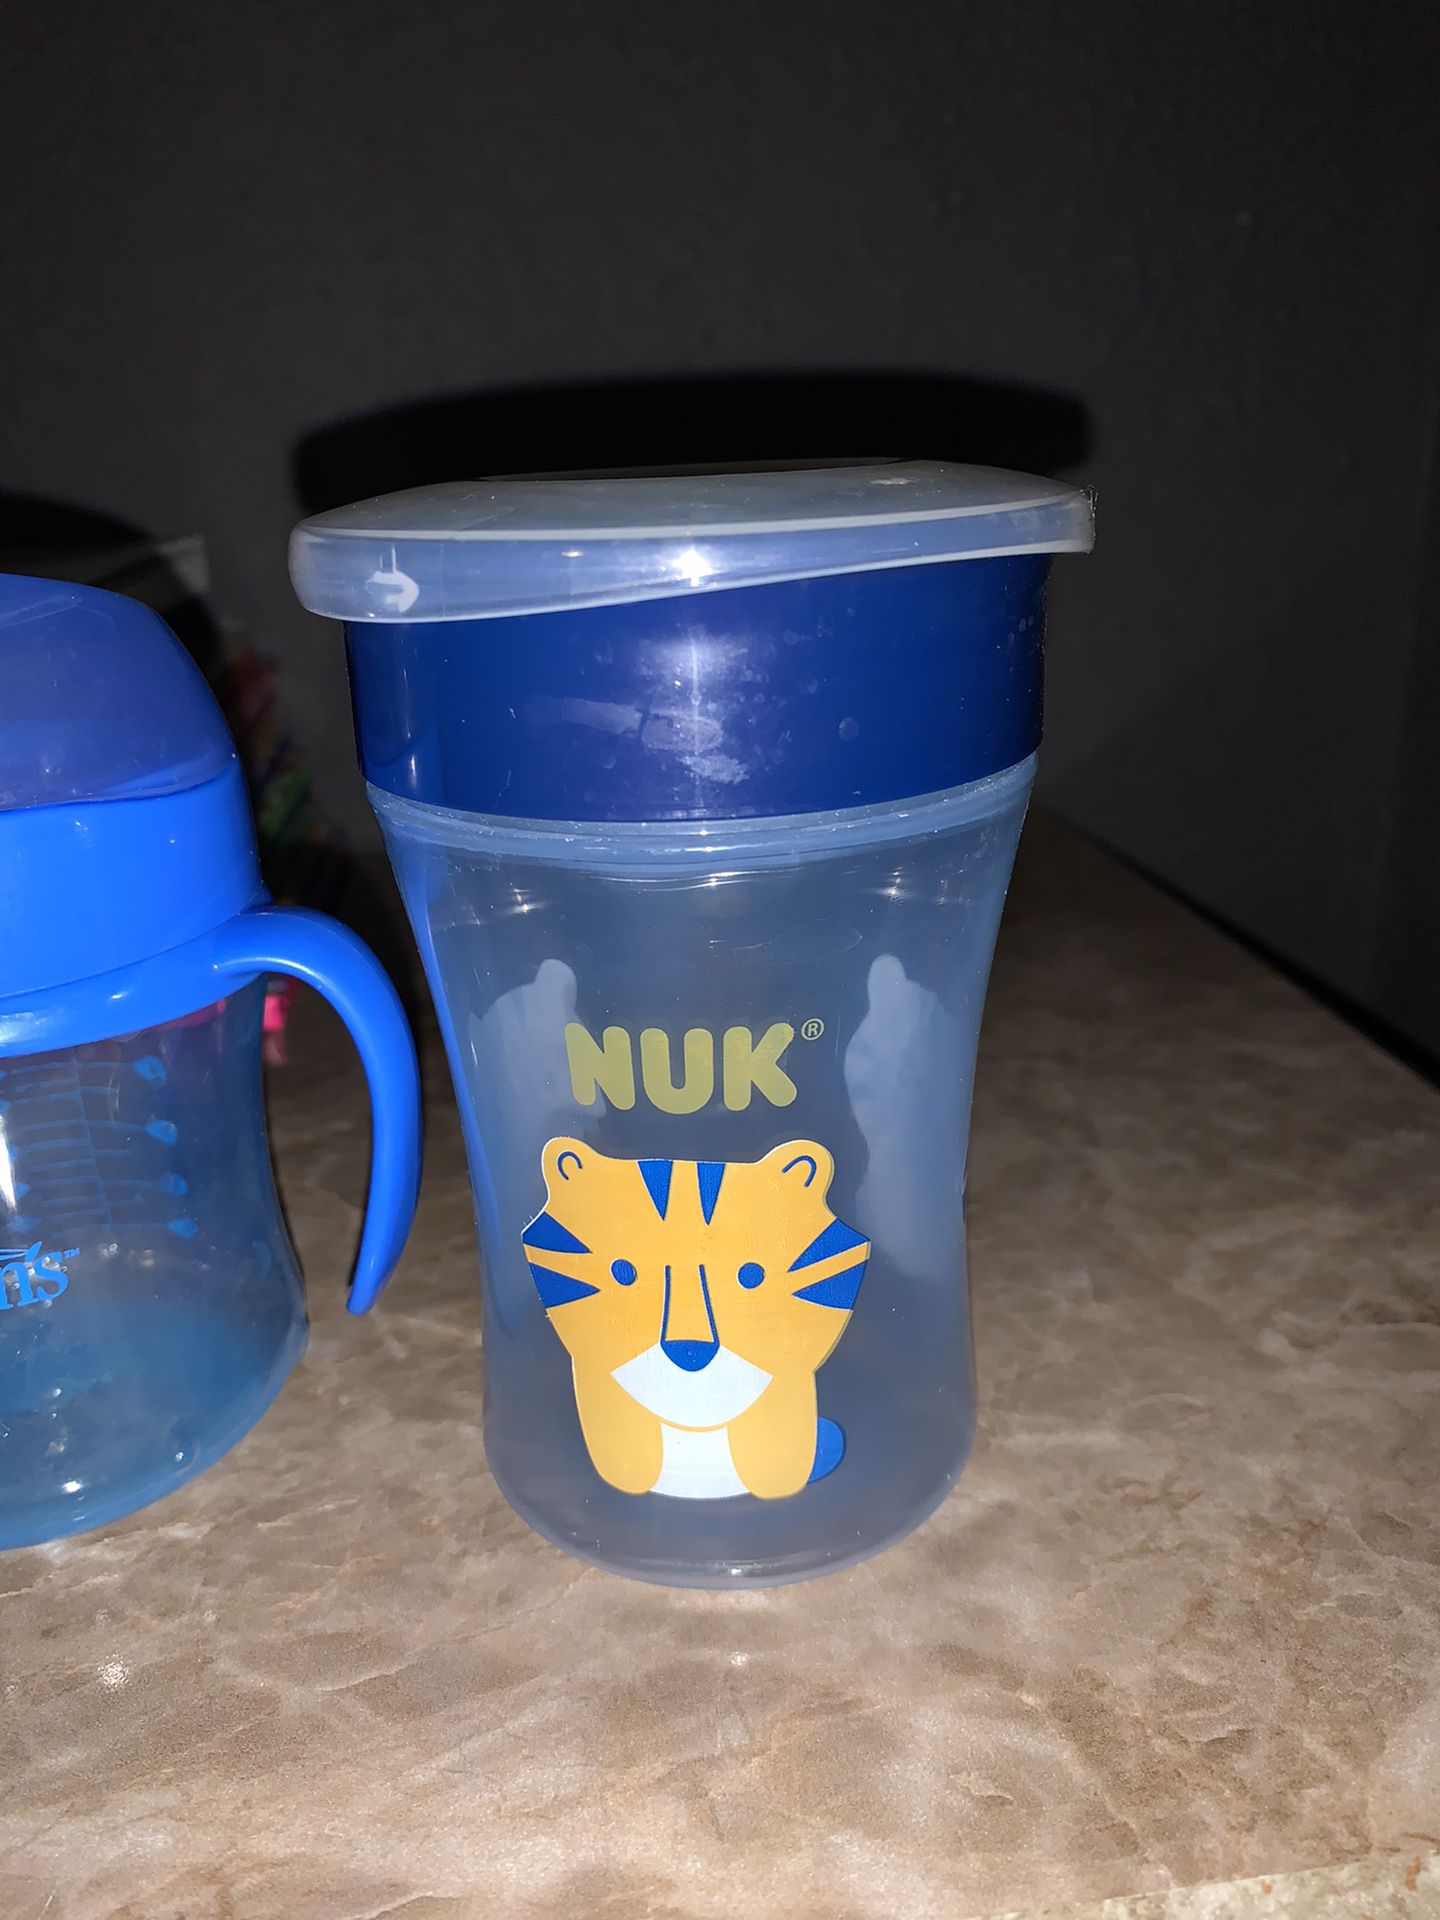 Nuk sippy cup